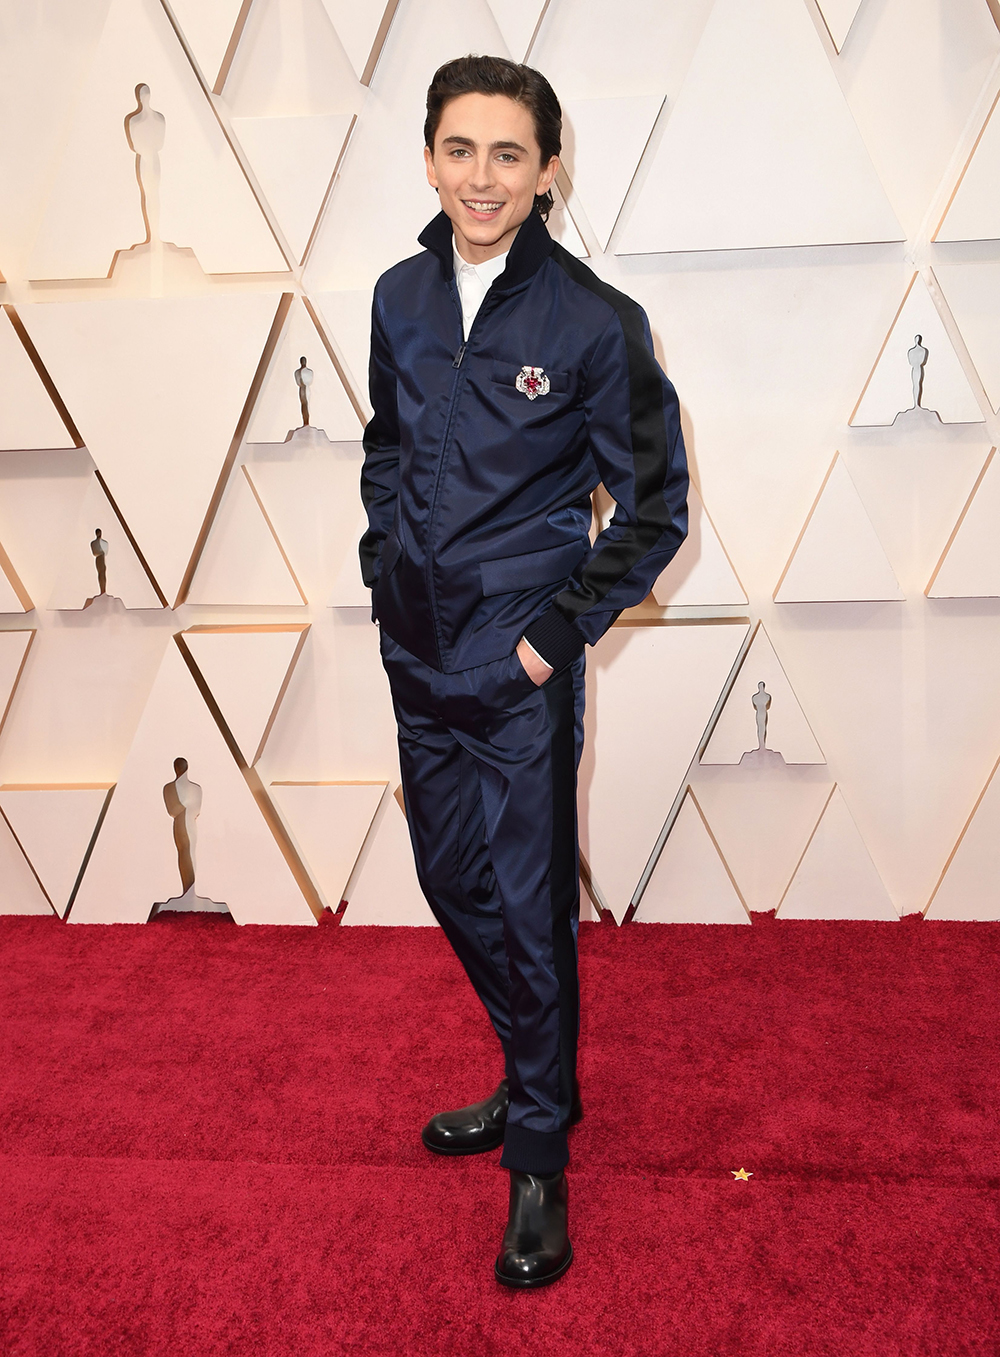 US-French actor Timothee Chalamet arrives for the 92nd Oscars at the Dolby Theatre in Hollywood, California on February 9, 2020. (Photo by Robyn Beck / AFP) (Photo by ROBYN BECK/AFP via Getty Images)